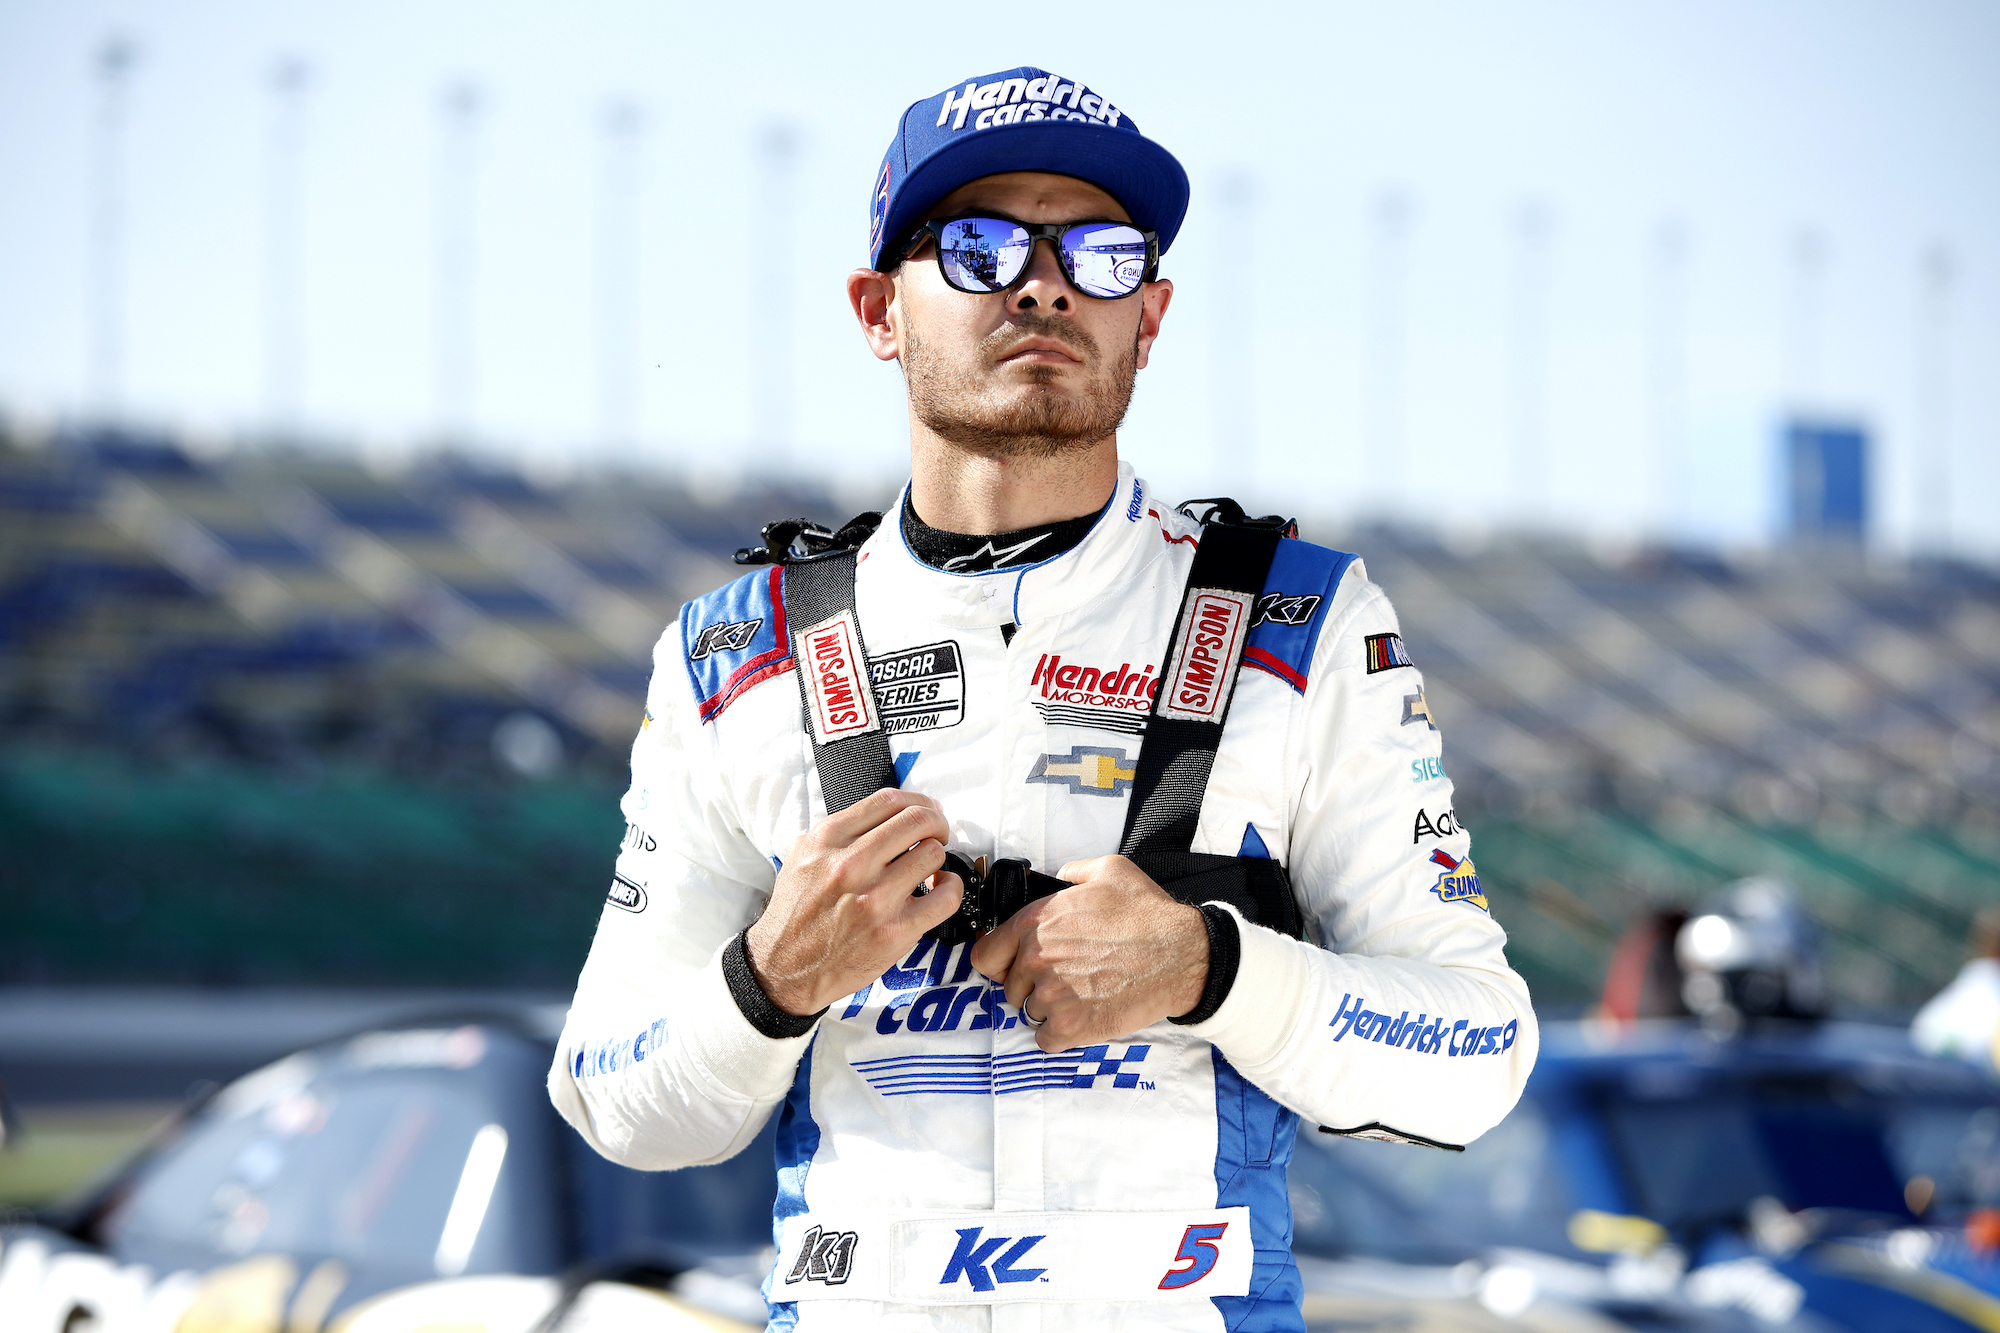 Kyle Larson Candidly Admits Surprise Clint Bowyer Didn’t Call Him Out for ‘Embarrassing’ Blunder at Texas